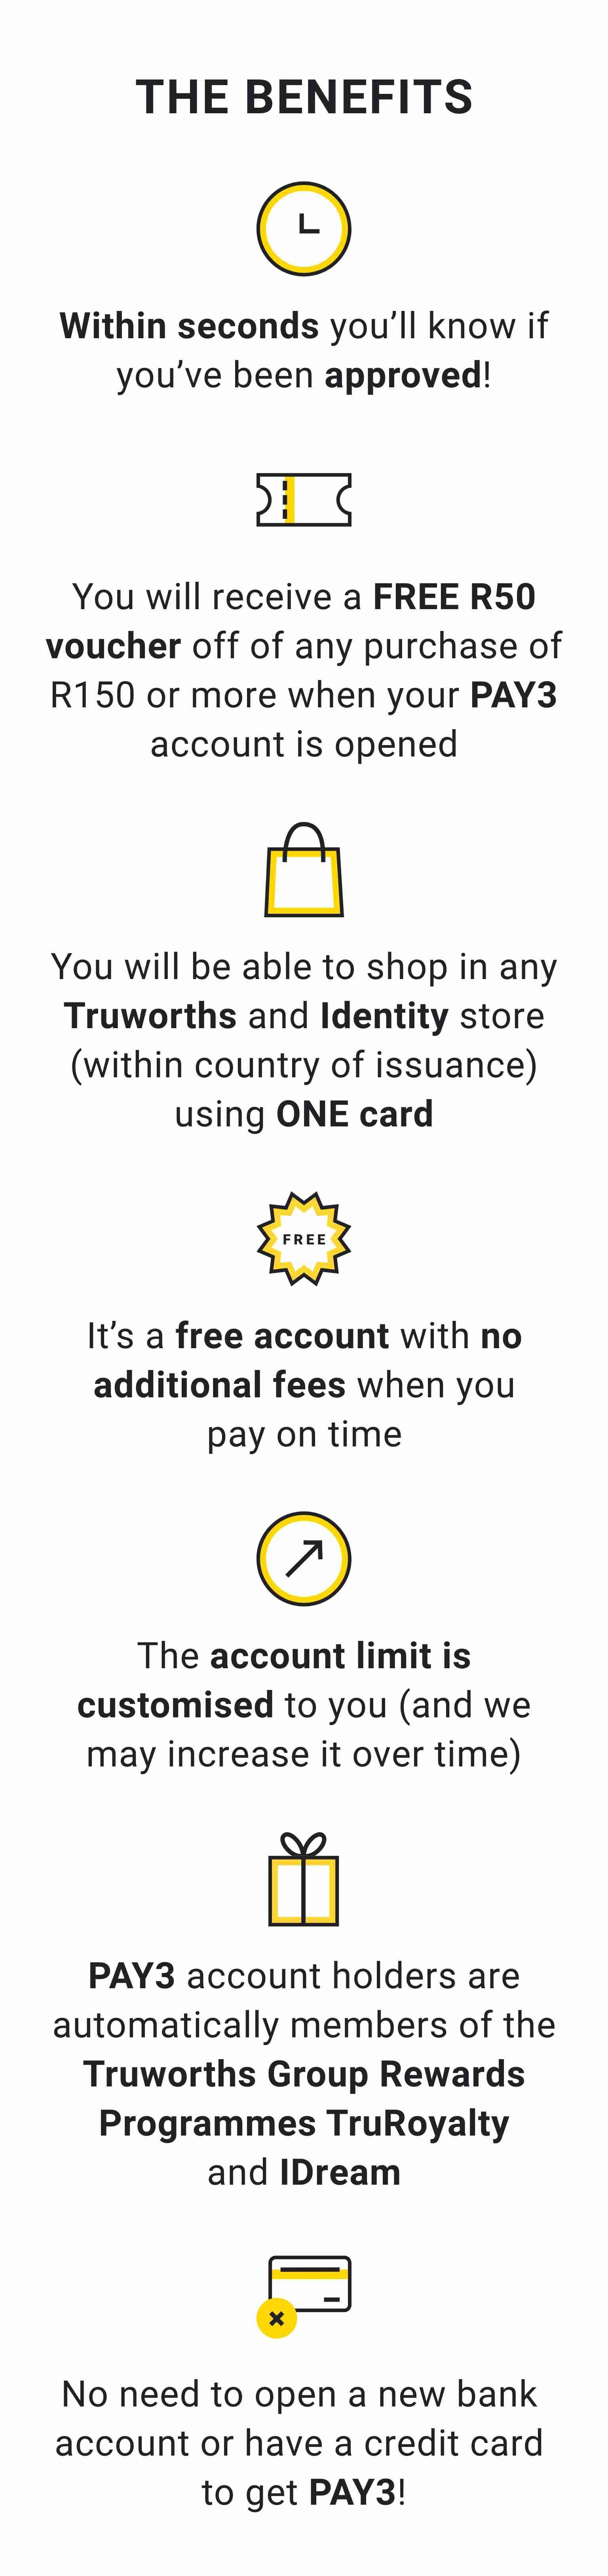 Truworths Clothing Accounts - Credit Cards Guide